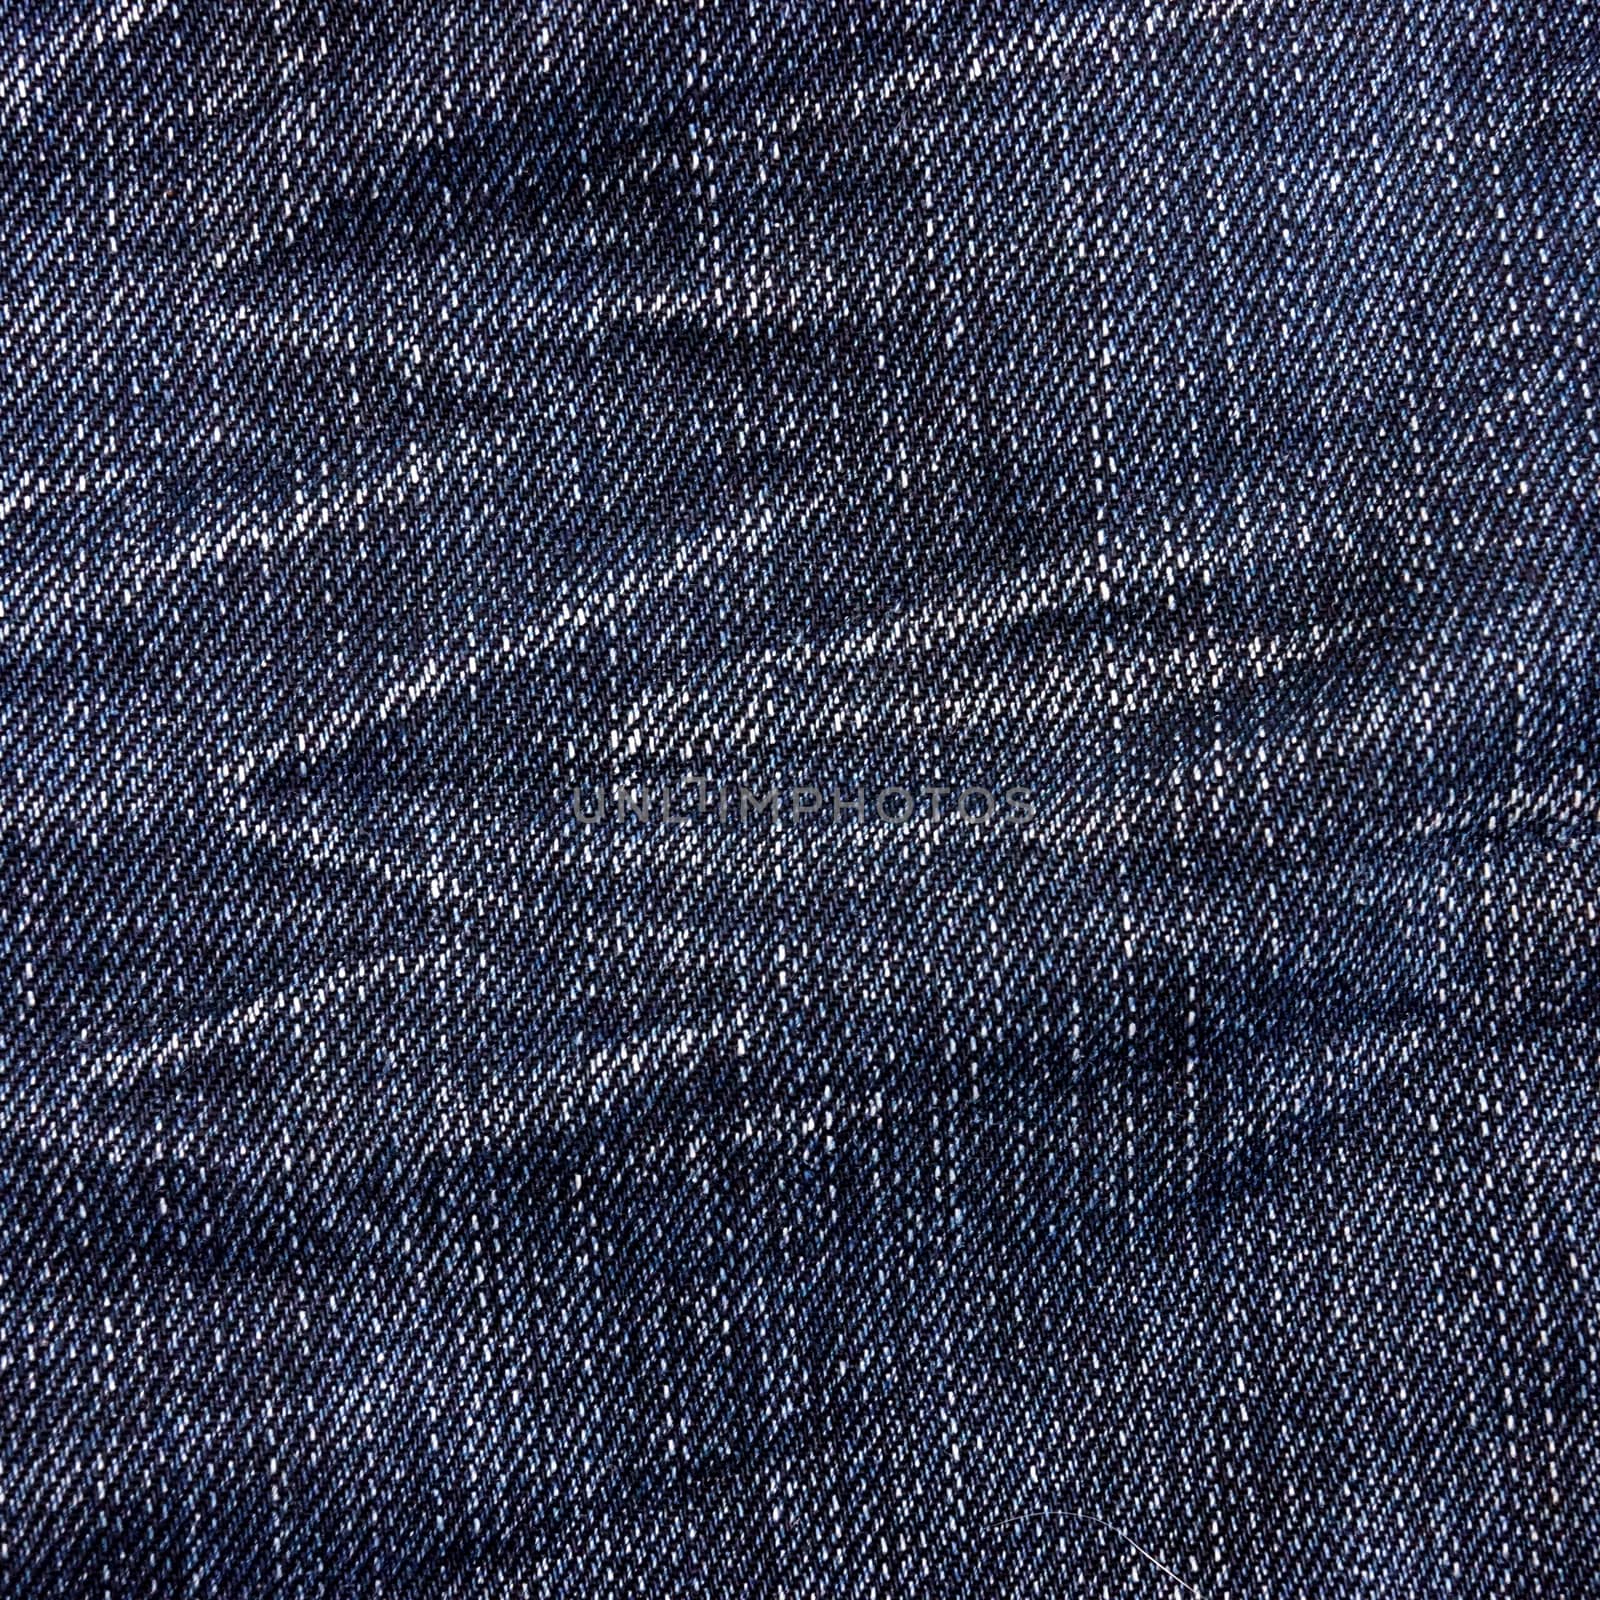 abstract grunge jeans background by Noppharat_th